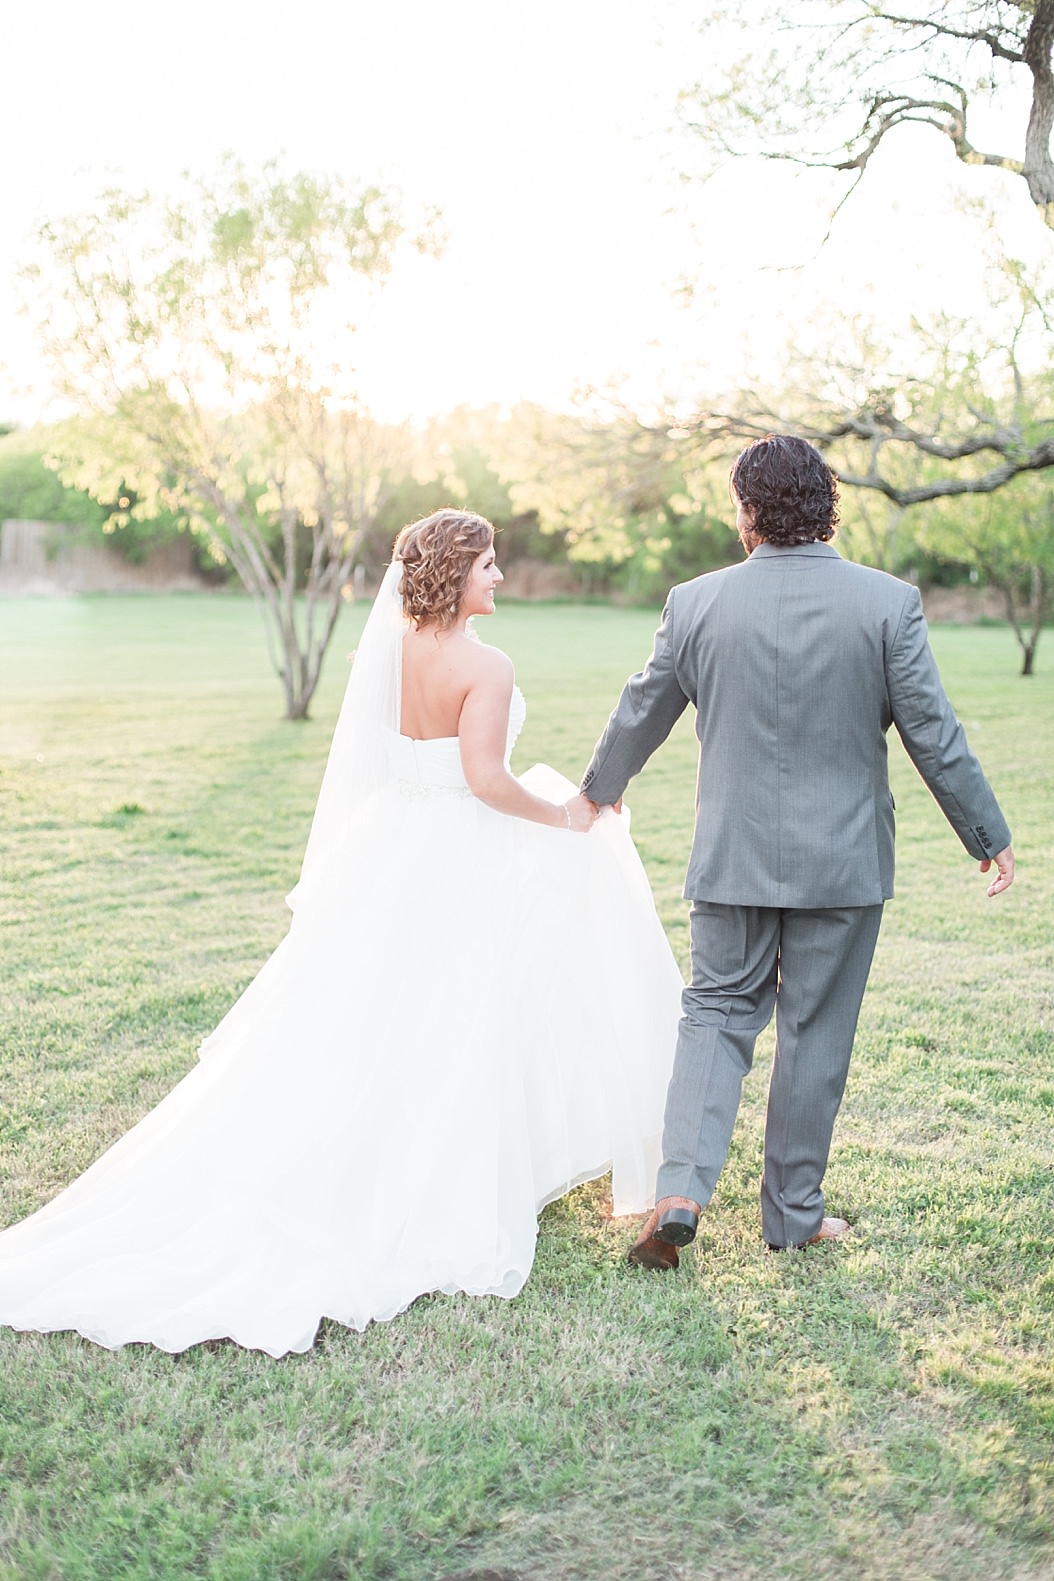 A Spring blush and mint wedding at Rancho La Mission in San Antonio Texas by Allison Jeffers Wedding Photography 0078